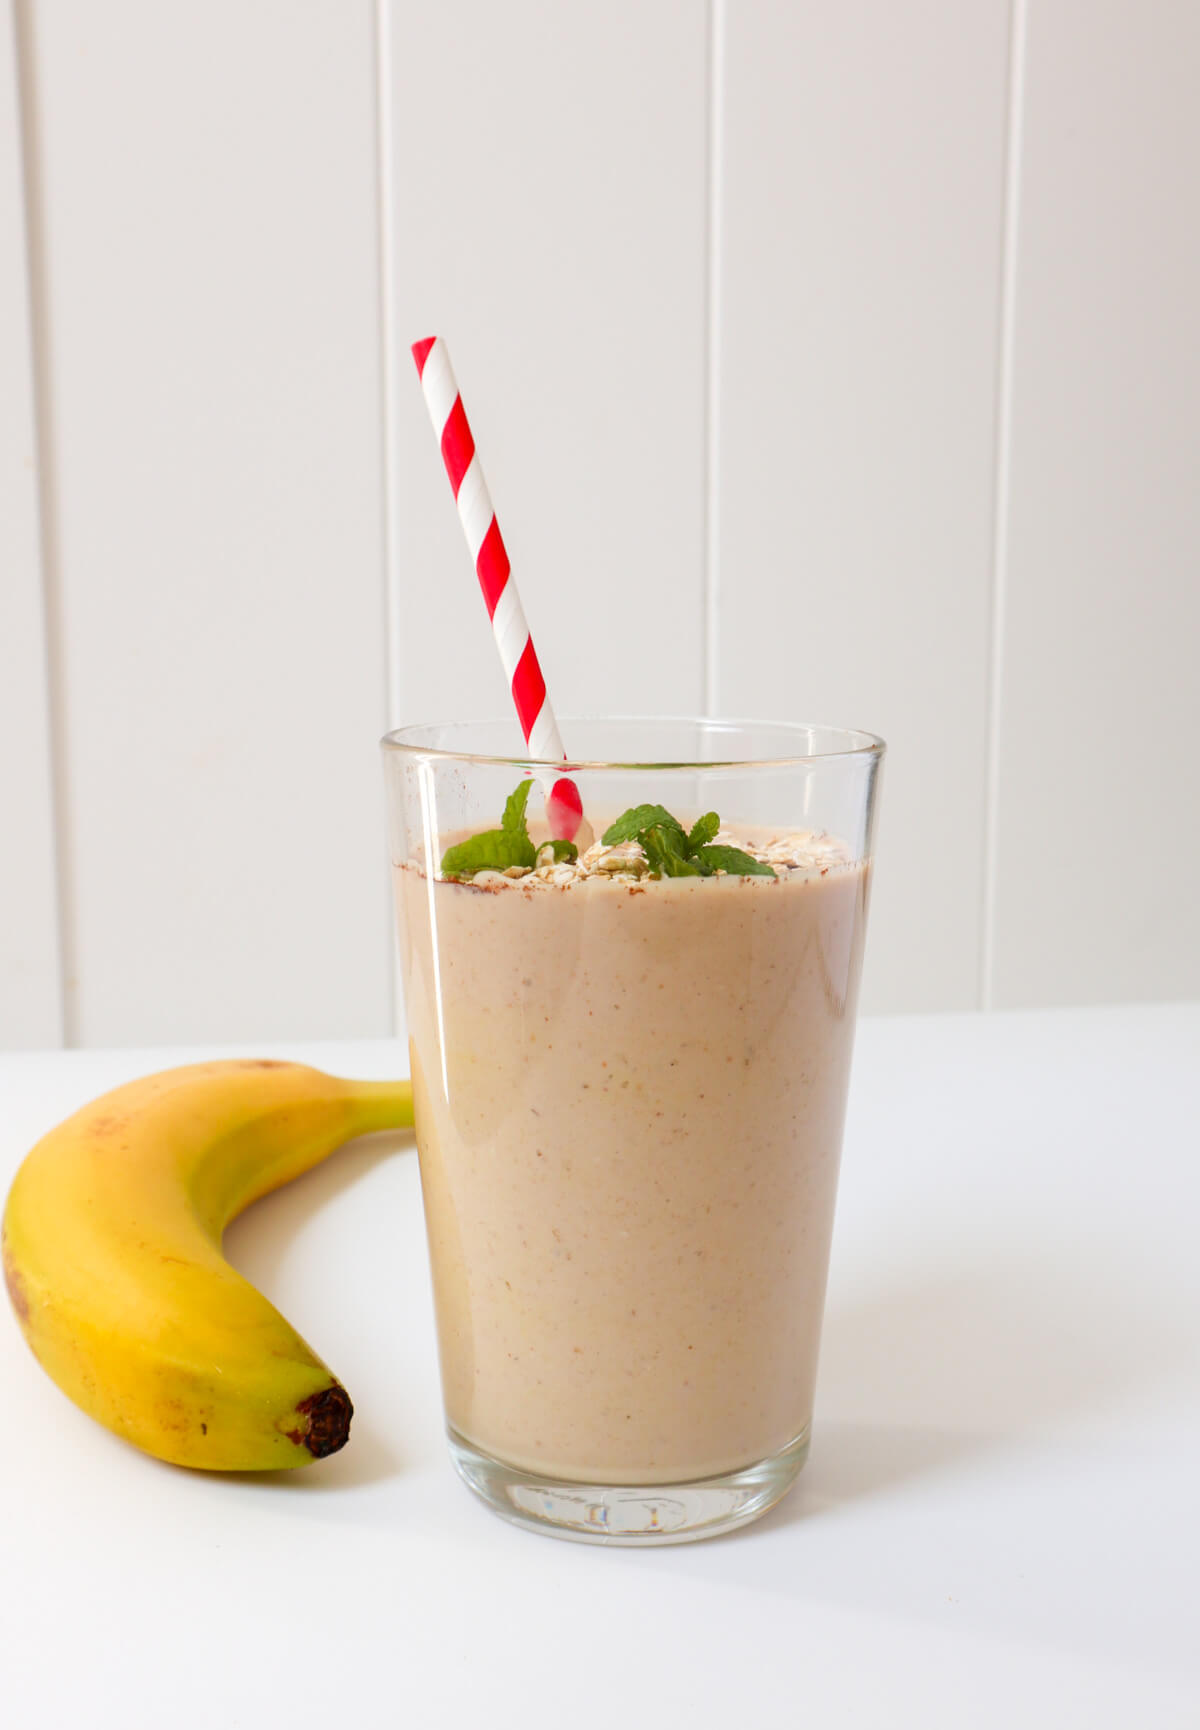 Banana peanut butter oat milk smoothie in a glass on a white background with a red straw in it